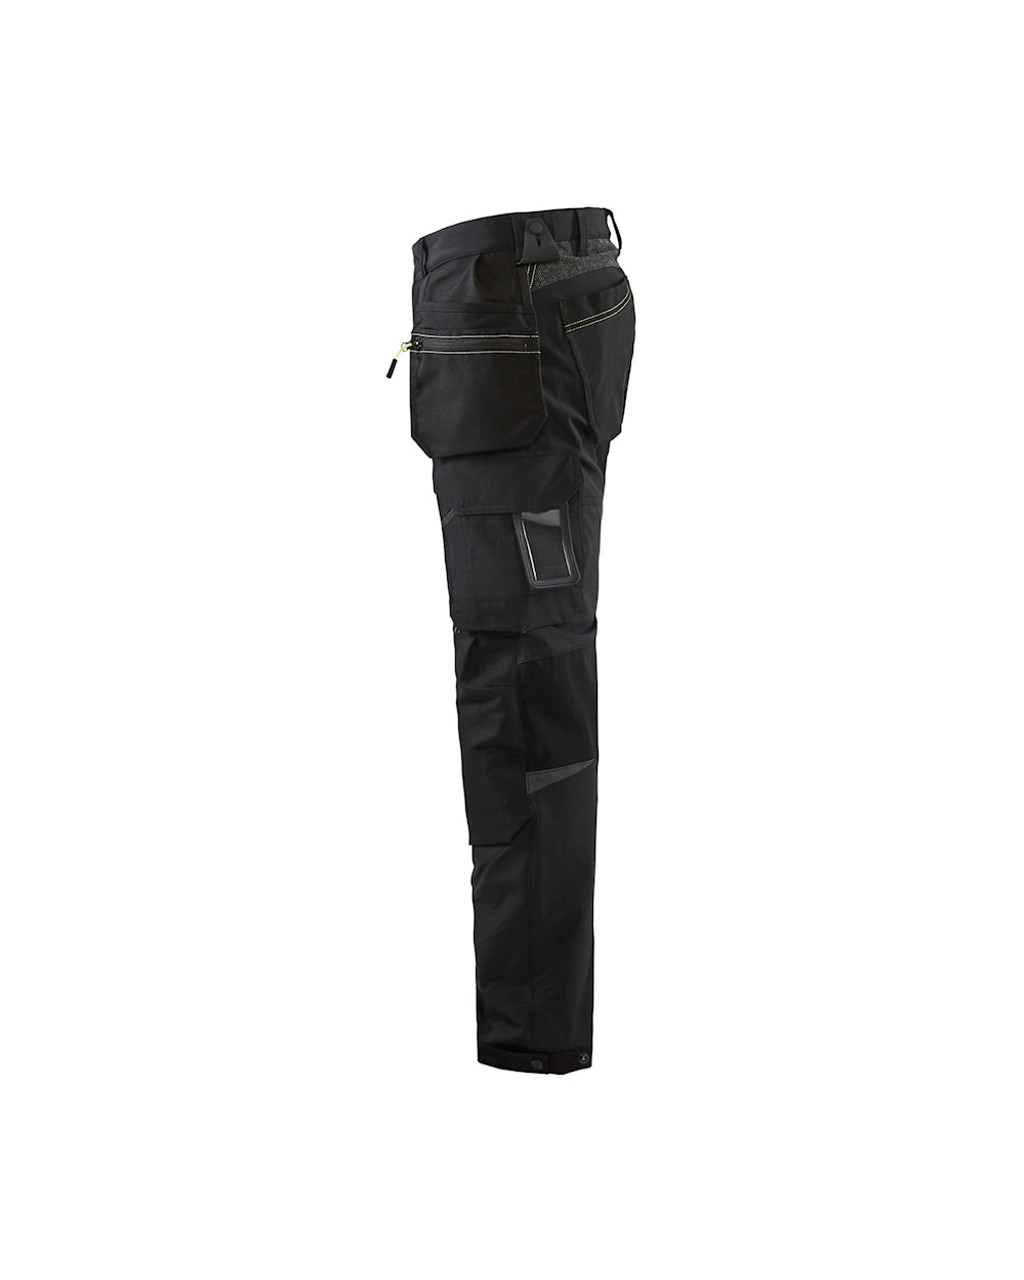 BLAKLADER 1522 Black Trousers with Holster Pockets for the Automotive Industry and Electricians in Victoria and South Australia.